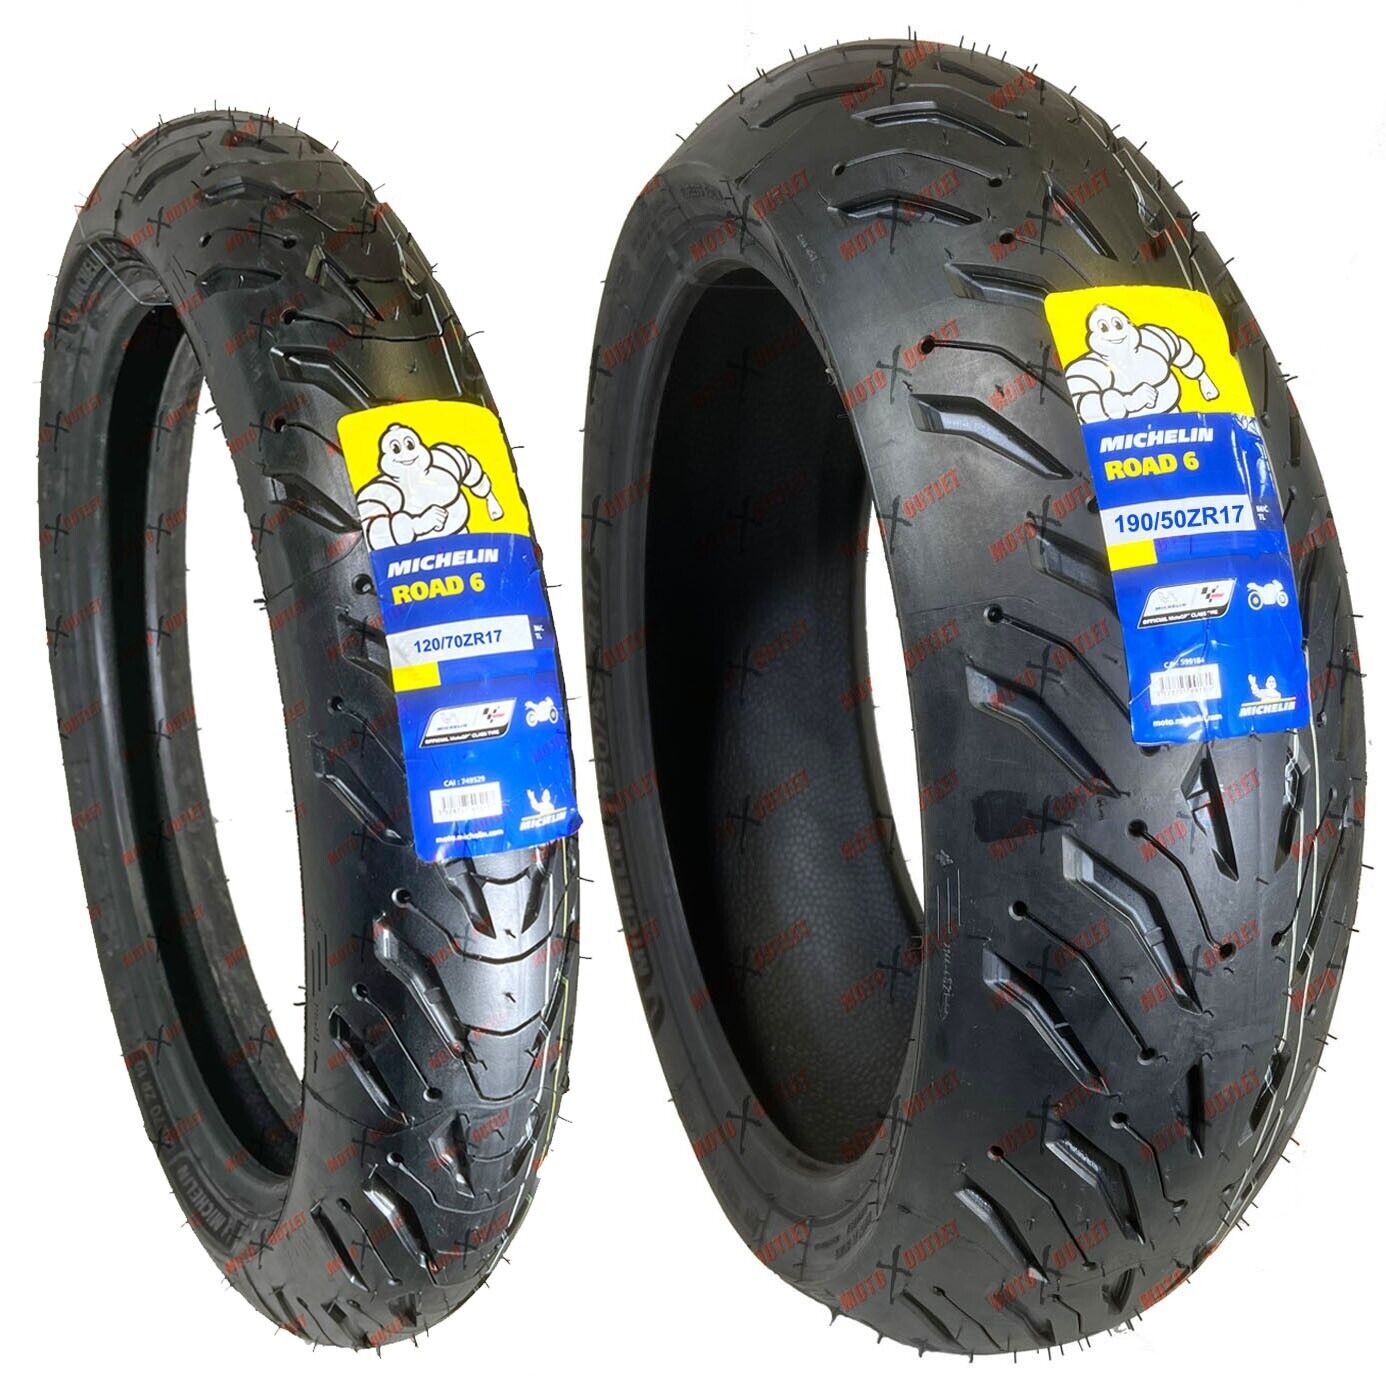 Michelin Road 6 190/50ZR17 120/70ZR17 Front Rear Motorcycle Tires Set